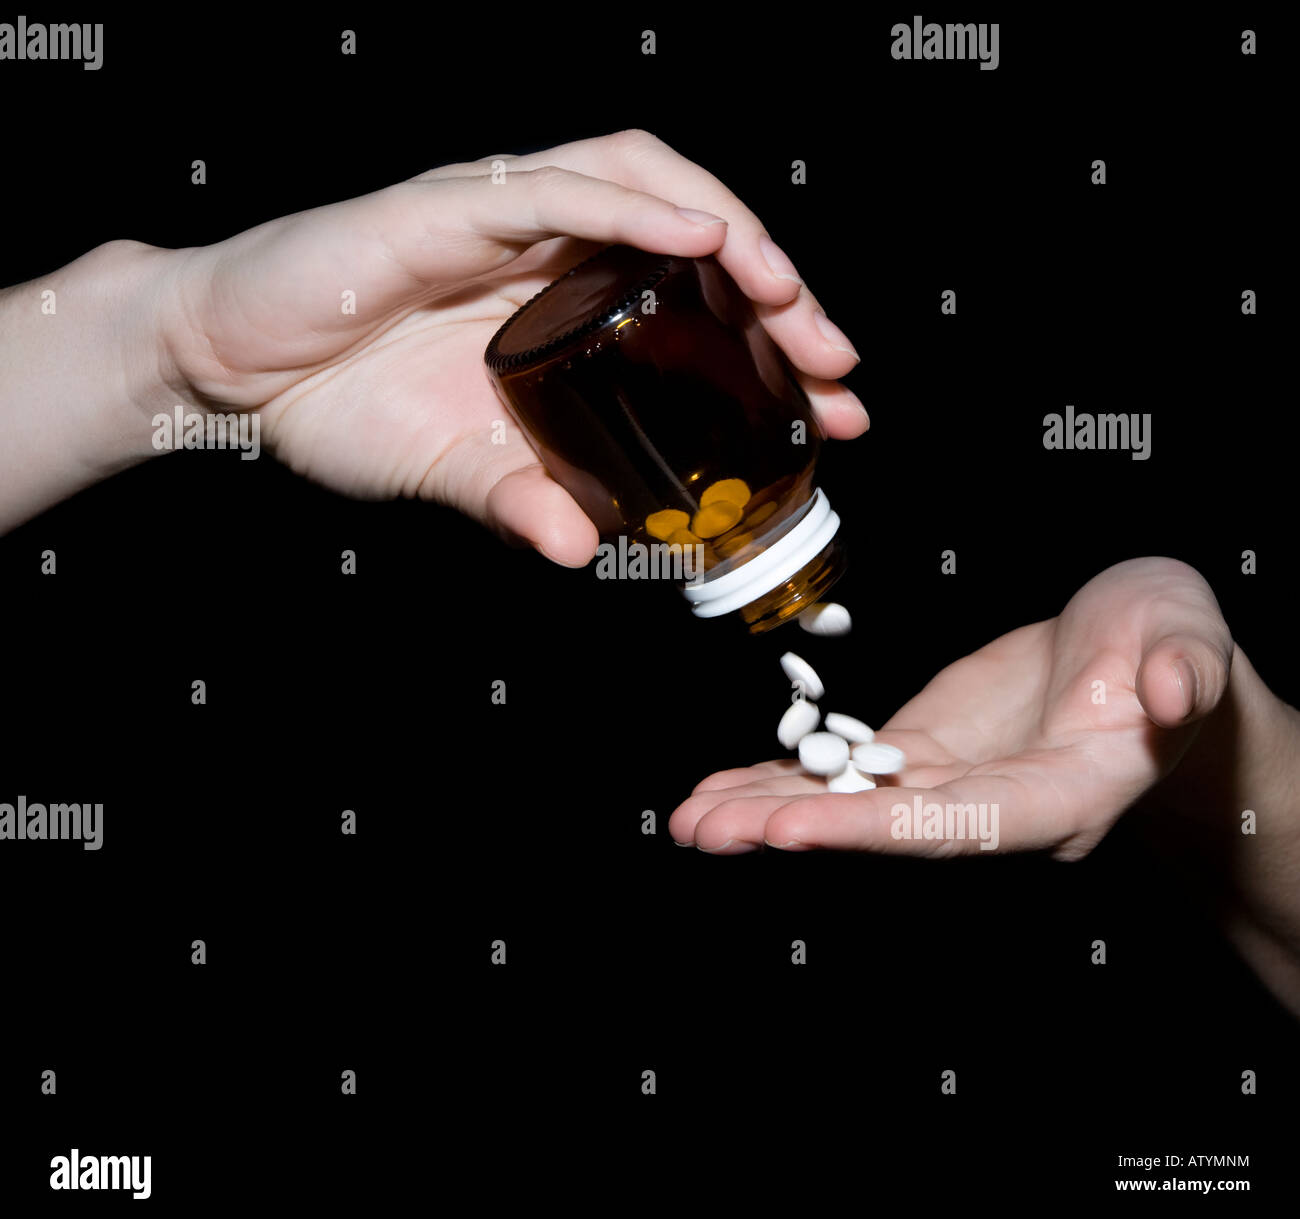 A woman pouring pills from a bottle. Stock Photo